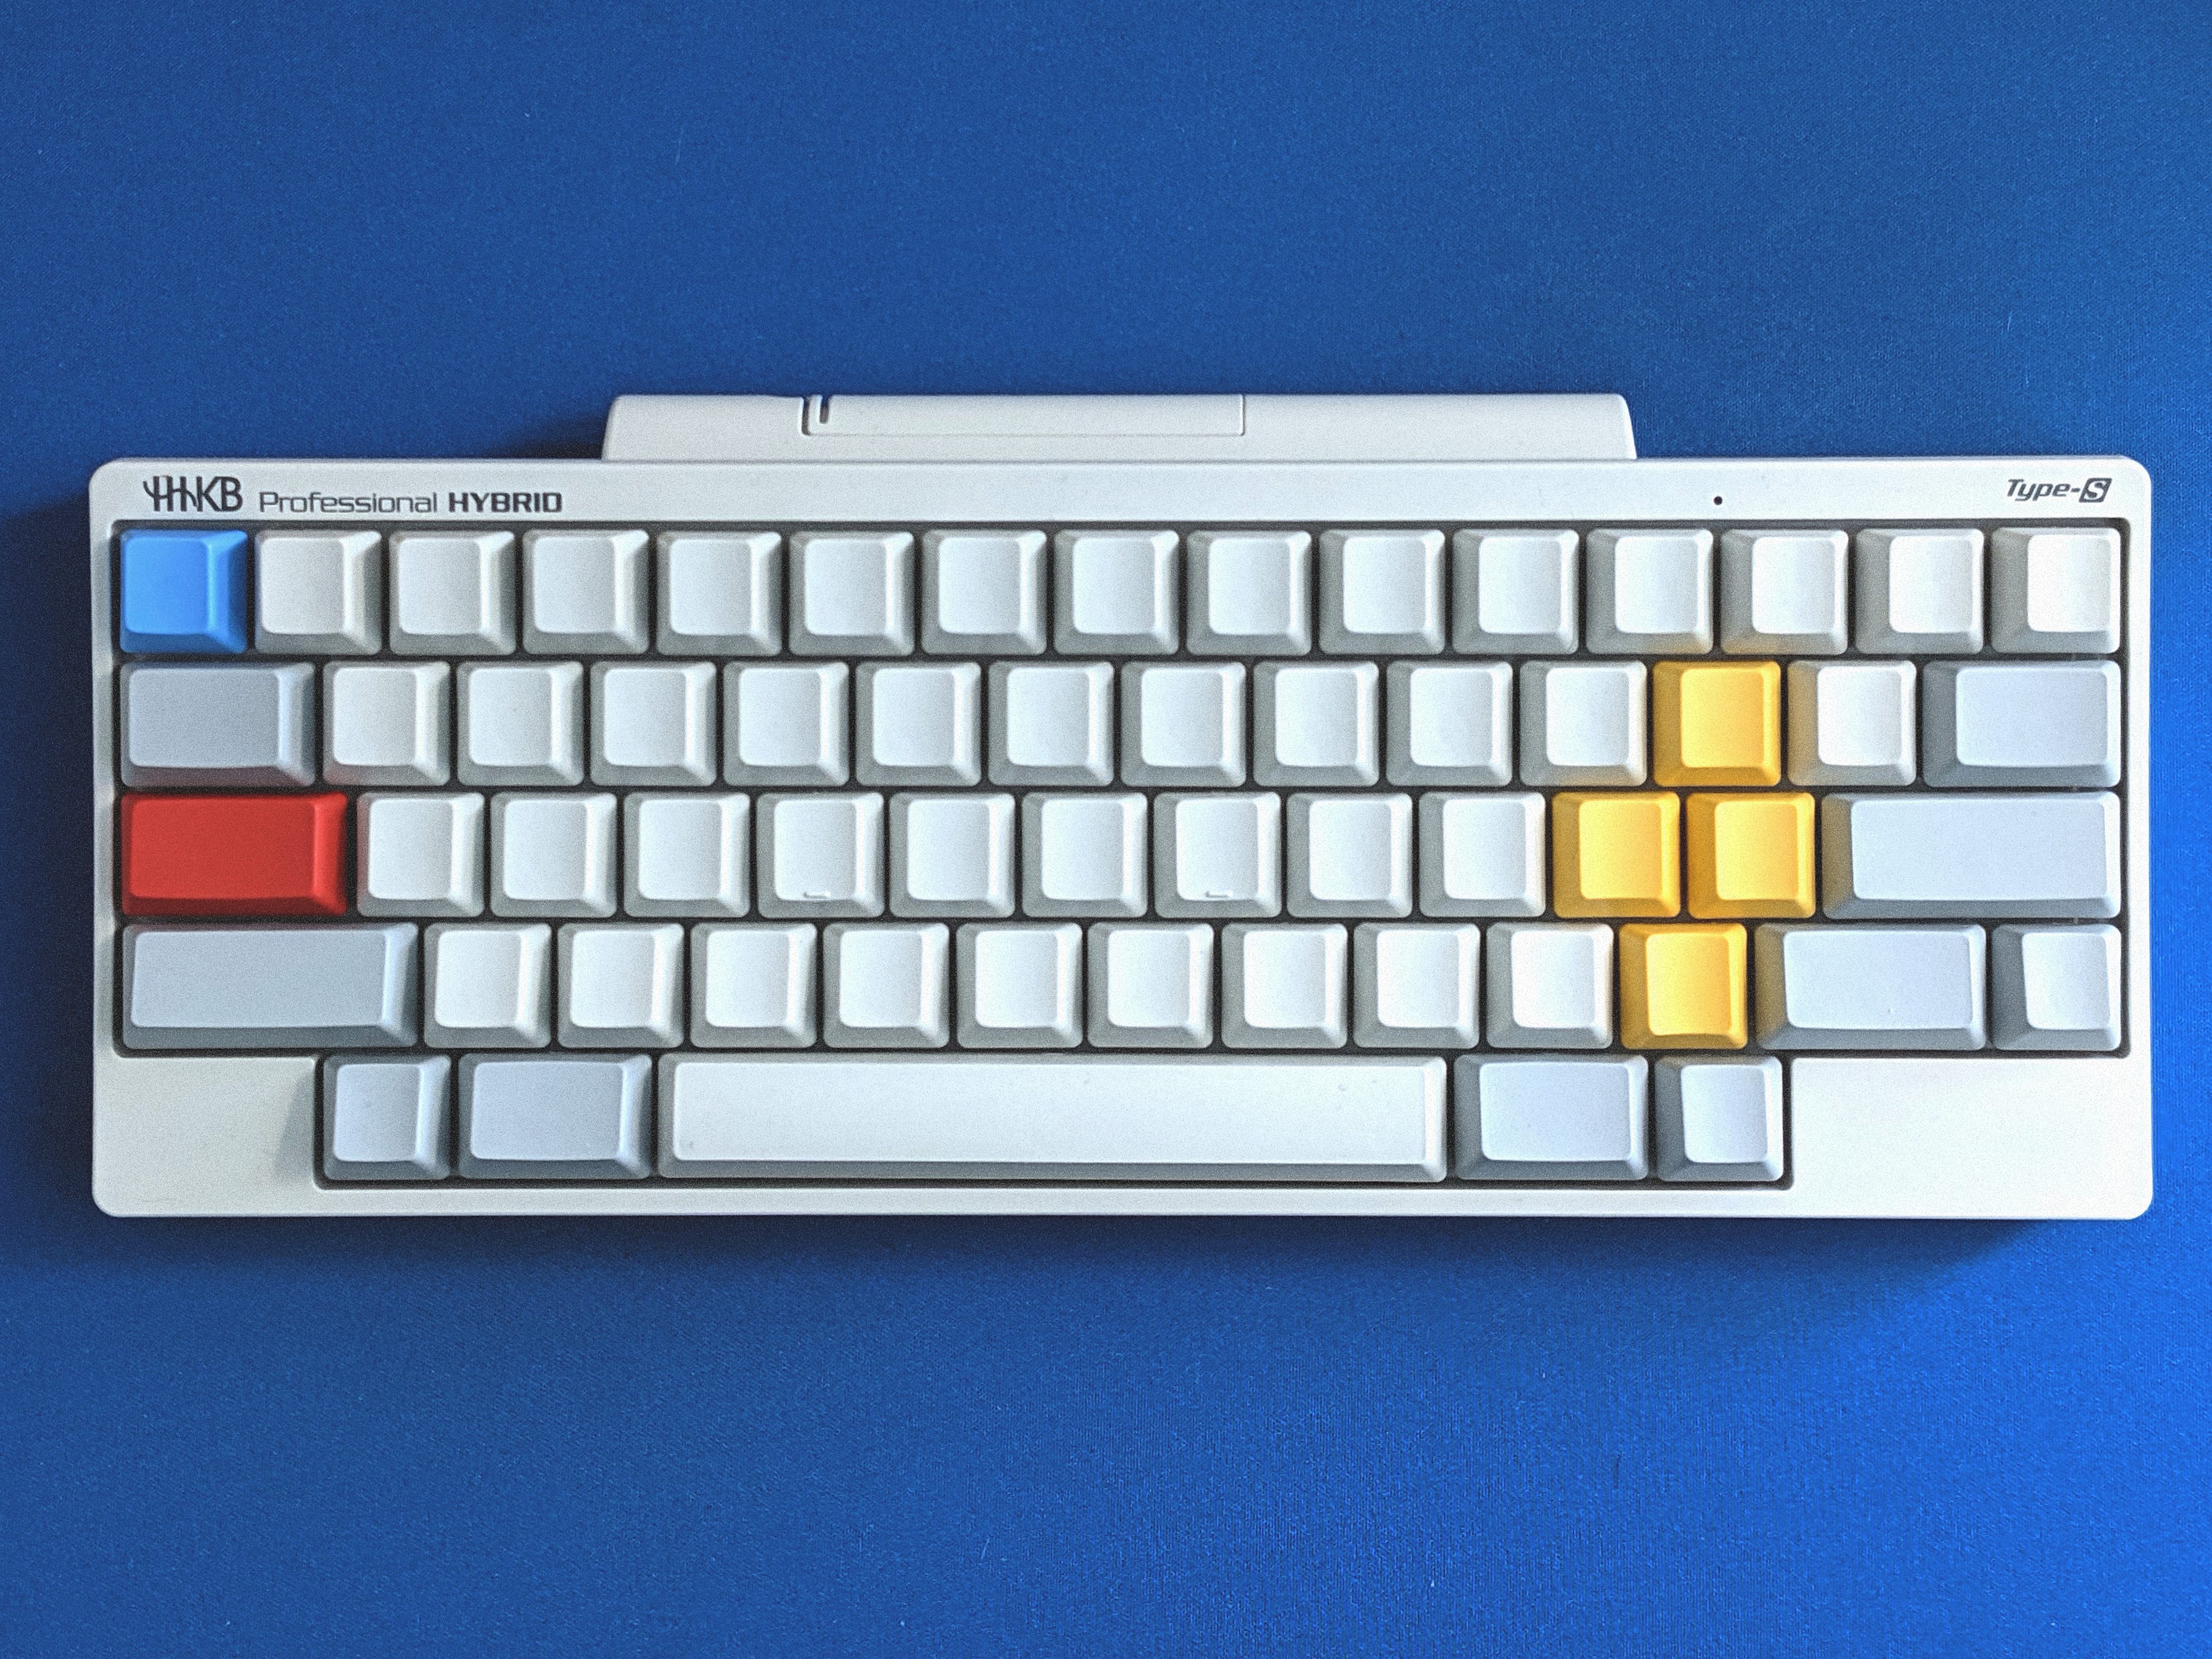 Keycaps: The Essential Guide for Keyboard Enthusiasts - HHKB